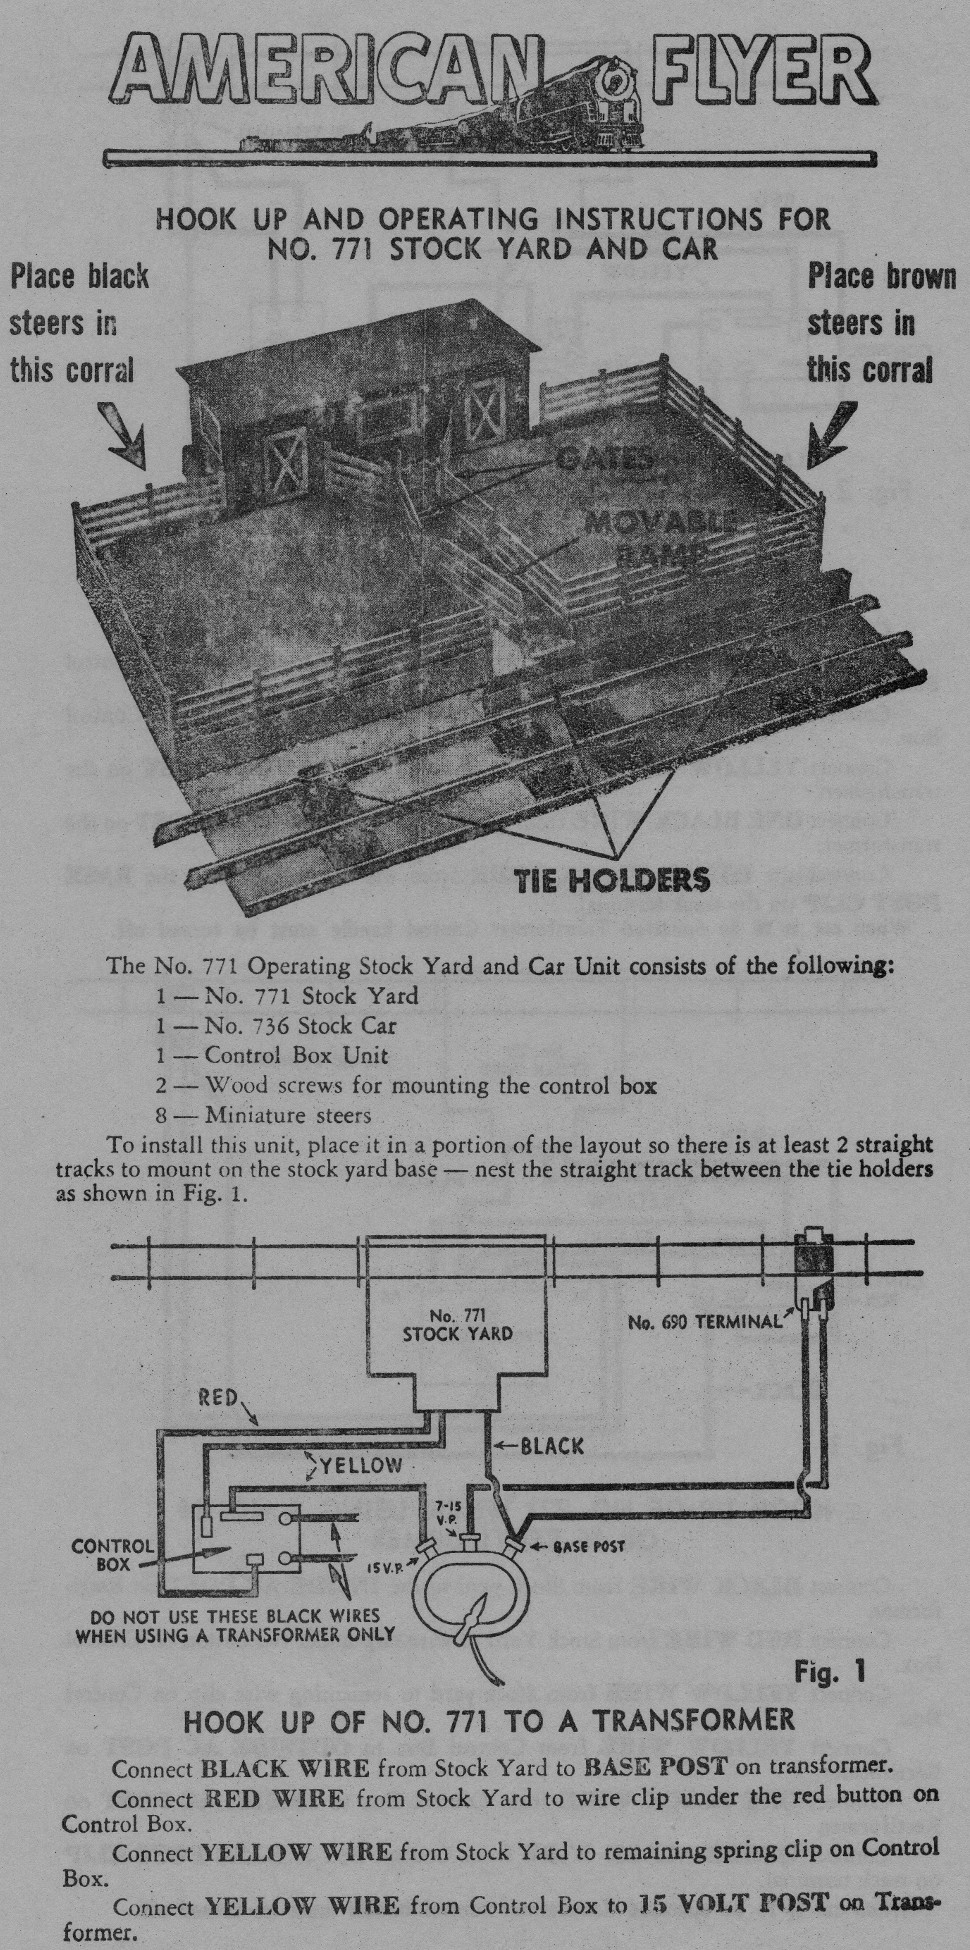 Hook Up and Operating Instructions for No. 771 Stock Yard & Car - Figure 1